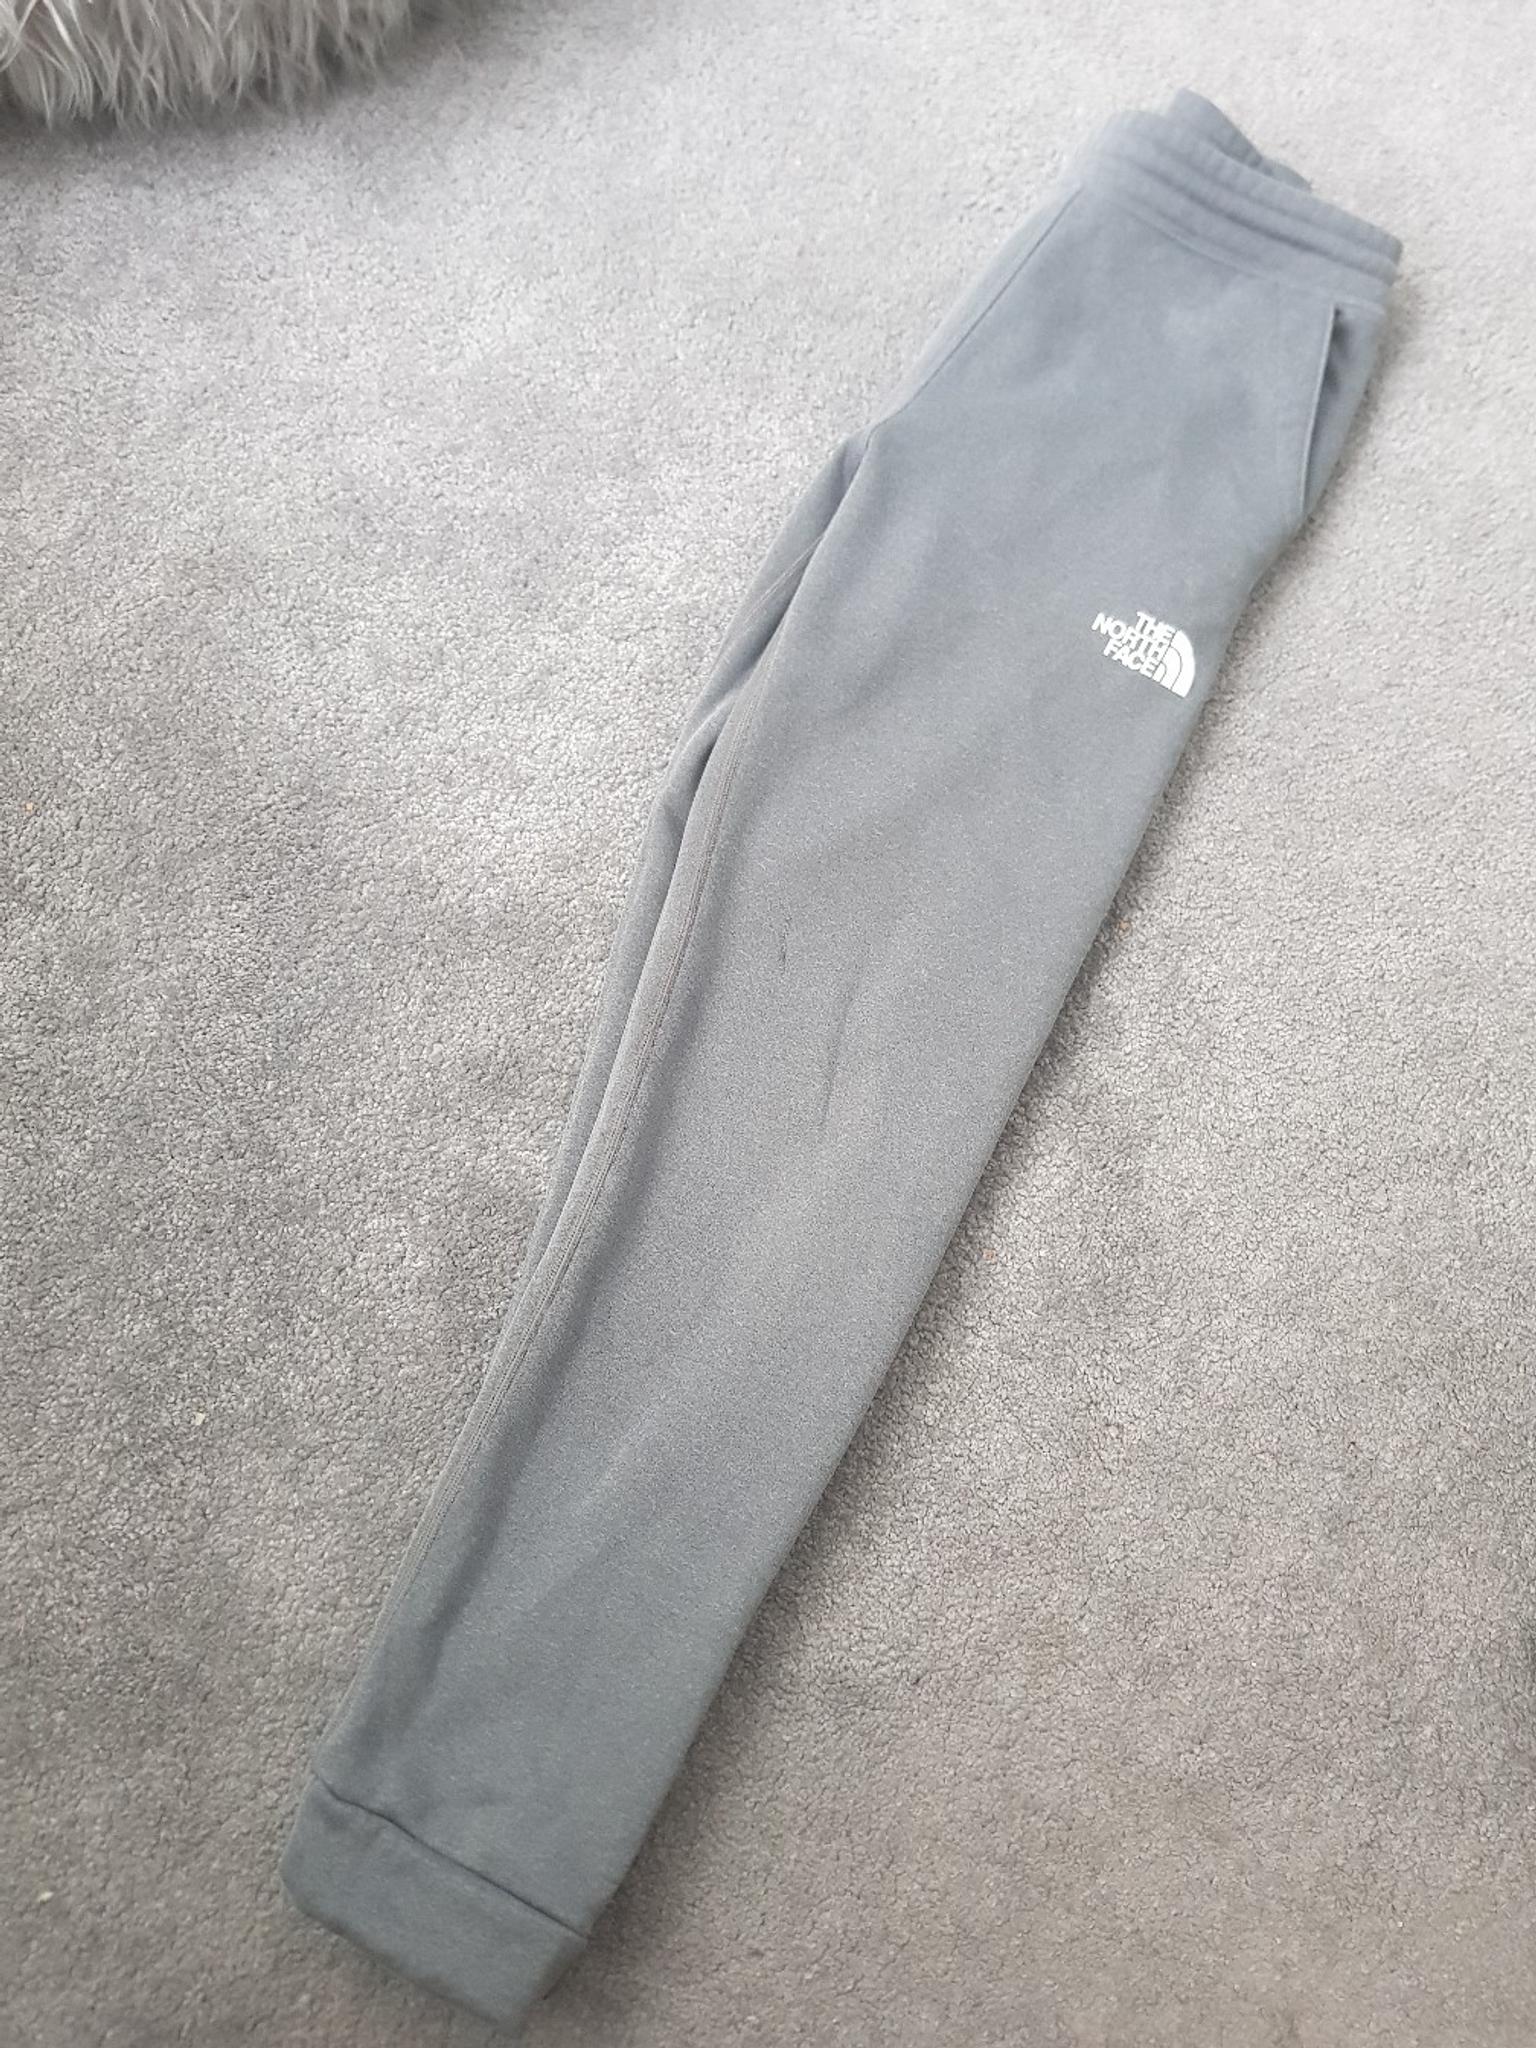 north face tracksuit bottoms in for £8 